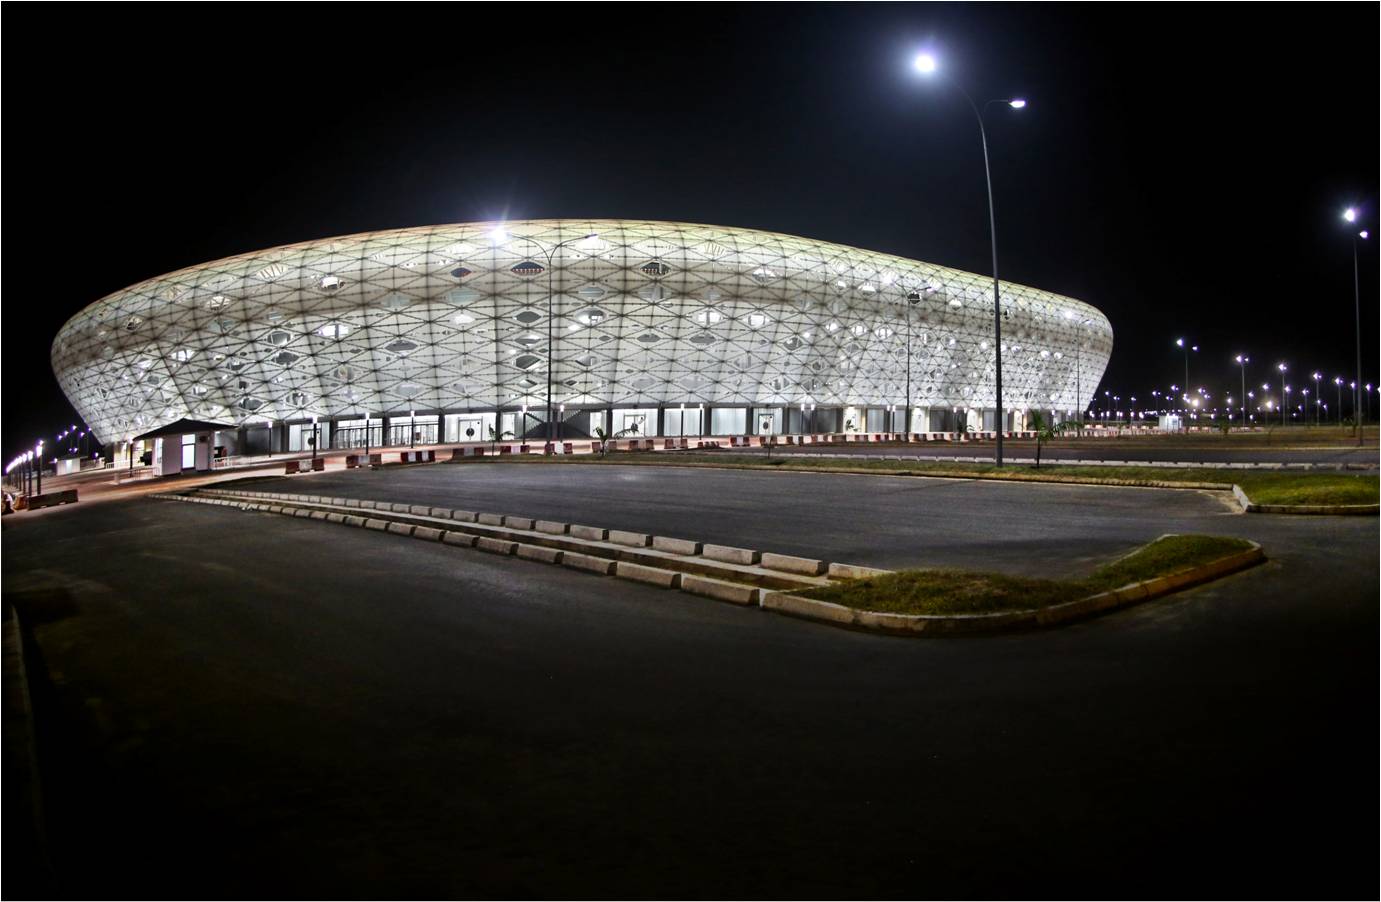 Nigeria/Benin bid in the forefront as CAF picks AFCON 2025 and 2027 host nations